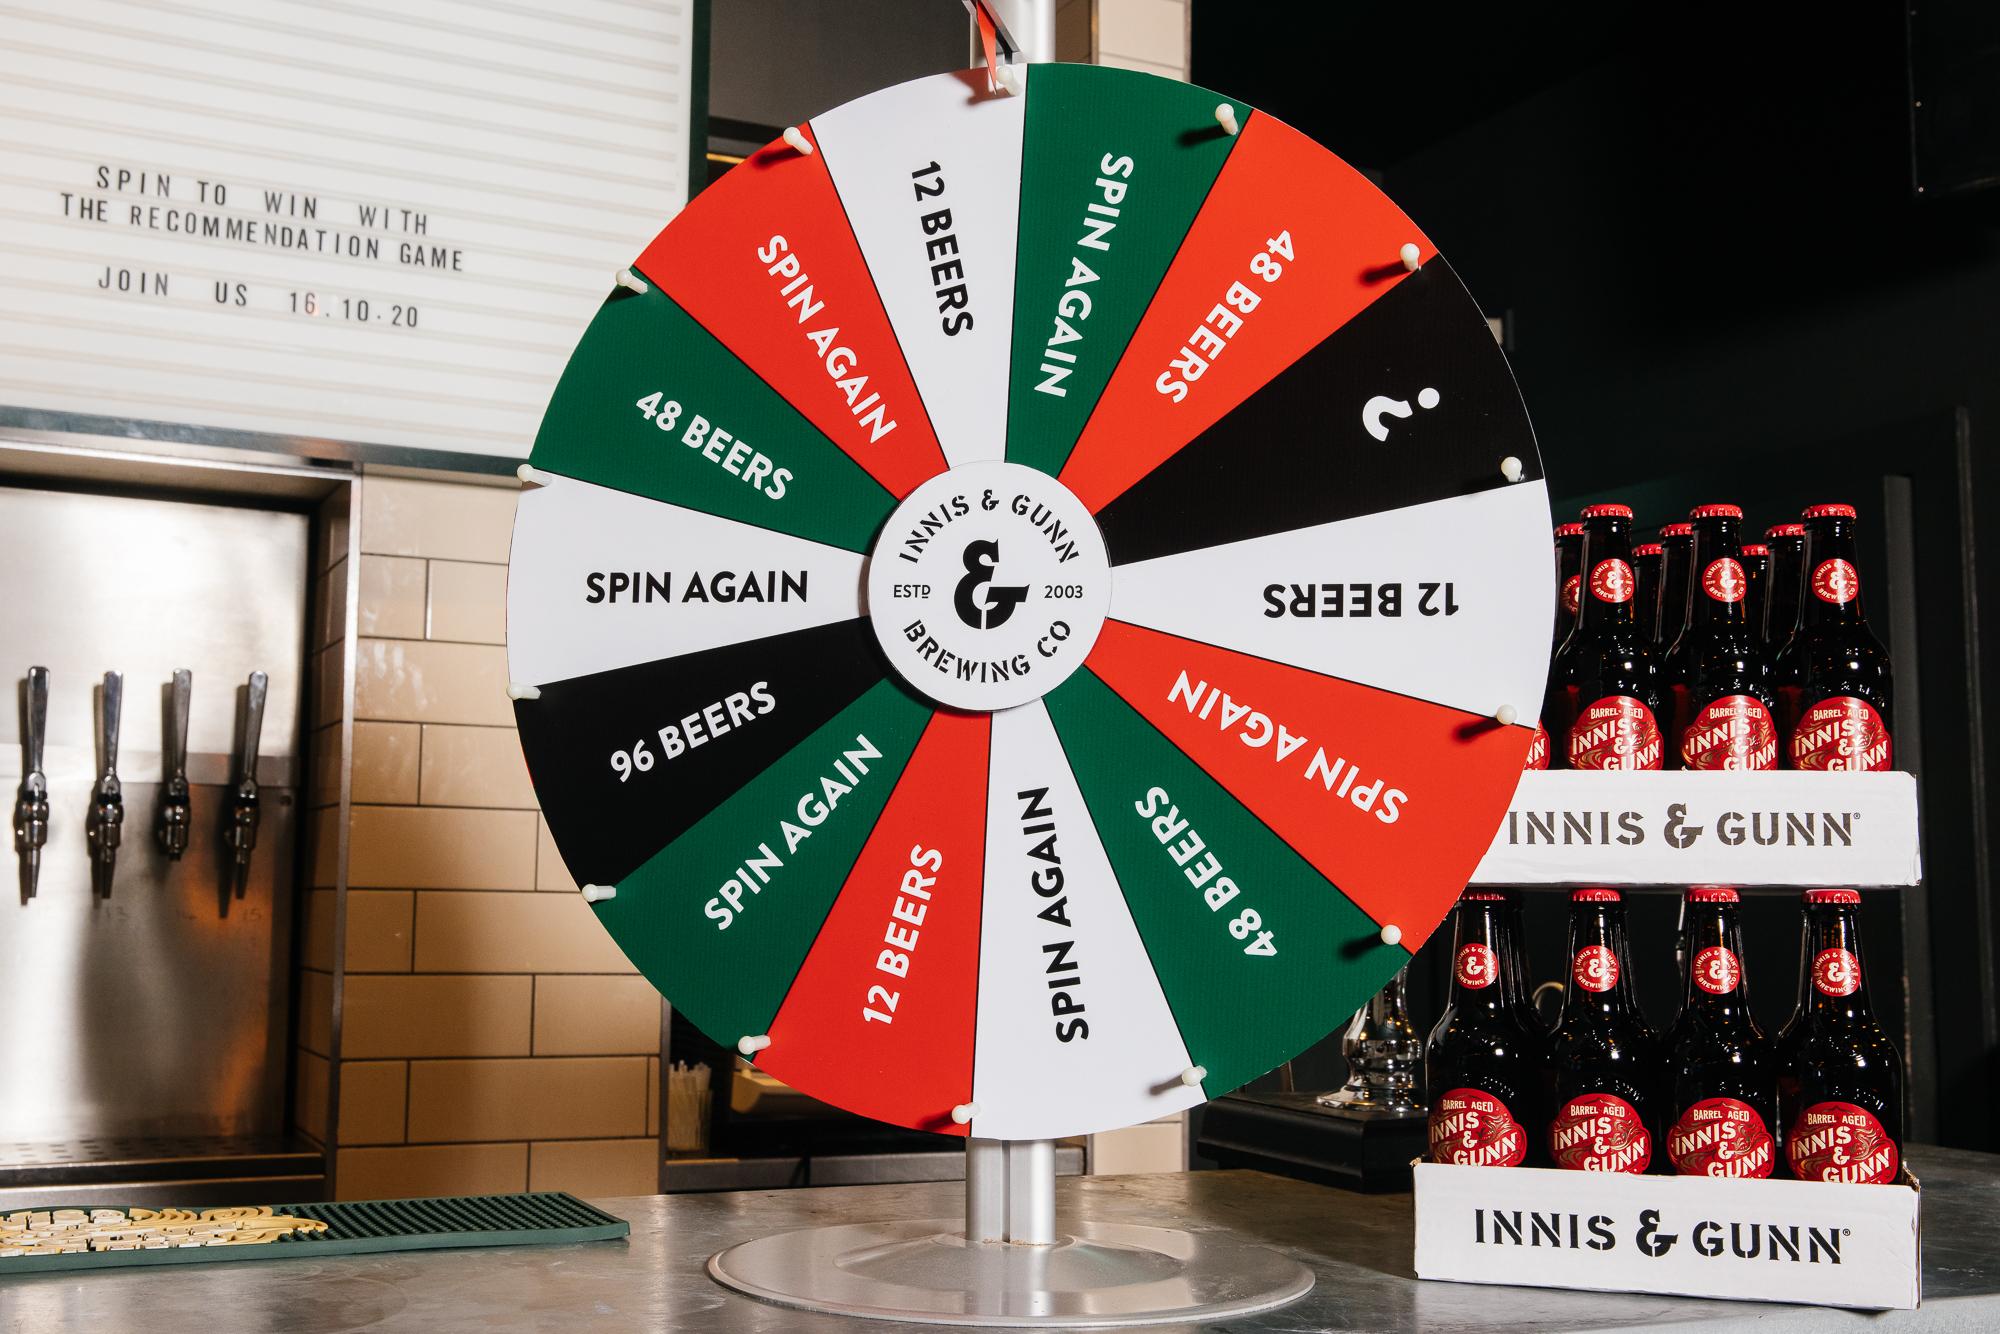 Fancy Winning Yourself Some @innisandgunn Beer? Join Them For ‘the Recommendation Game’ On Friday Night ? photo